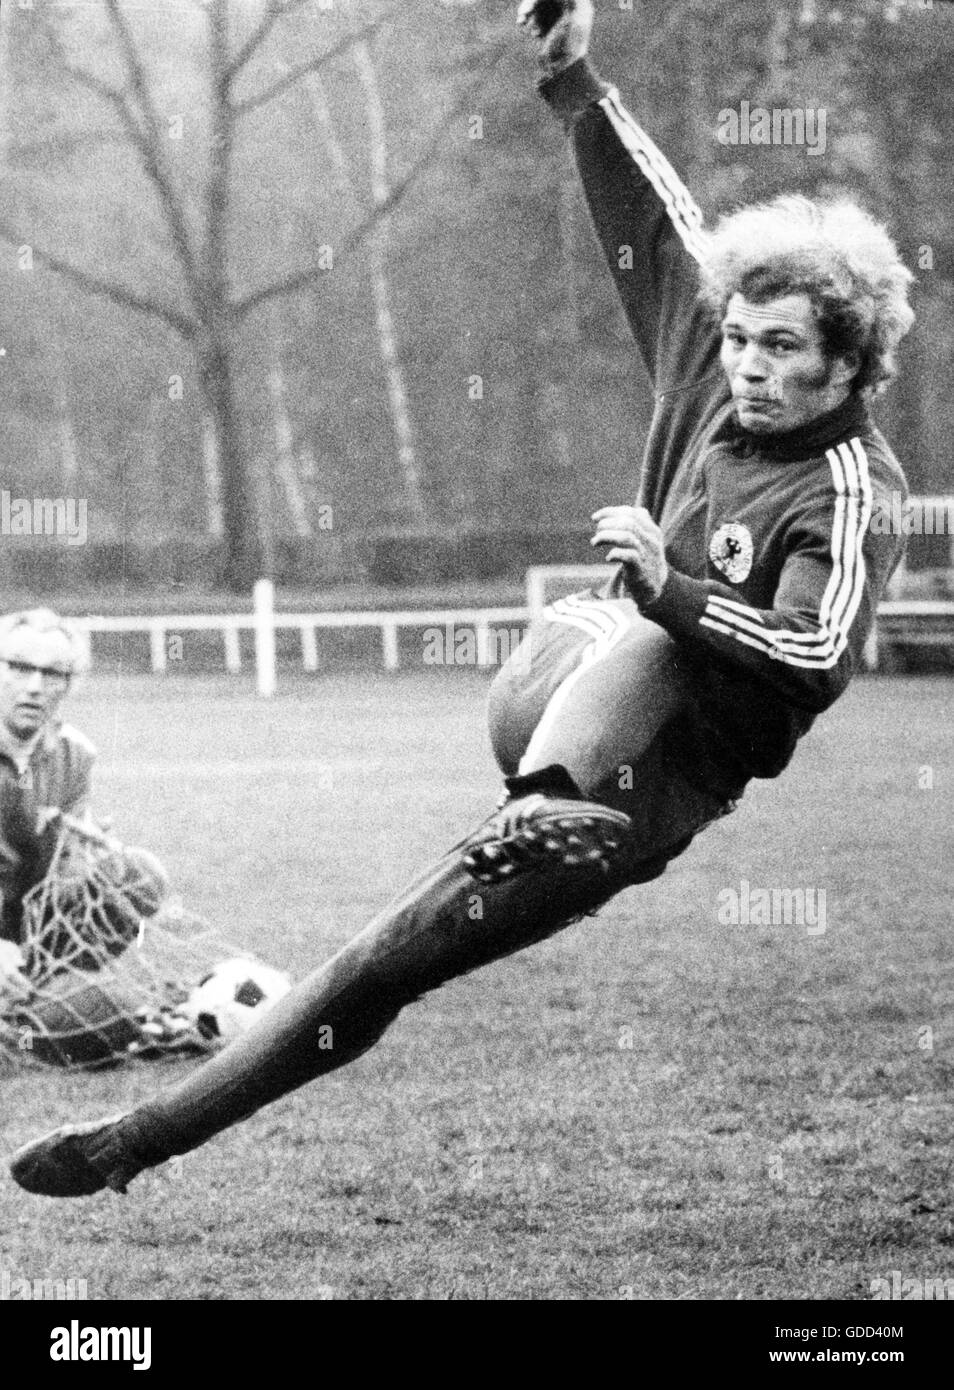 Hoeness, Ulrich 'Uli', * 5.1.1952, German athlete, football functionary and businessman, as player for the German National Team, during training, preparation for the European championship 1972, full length, 25.3.1972, Stock Photo